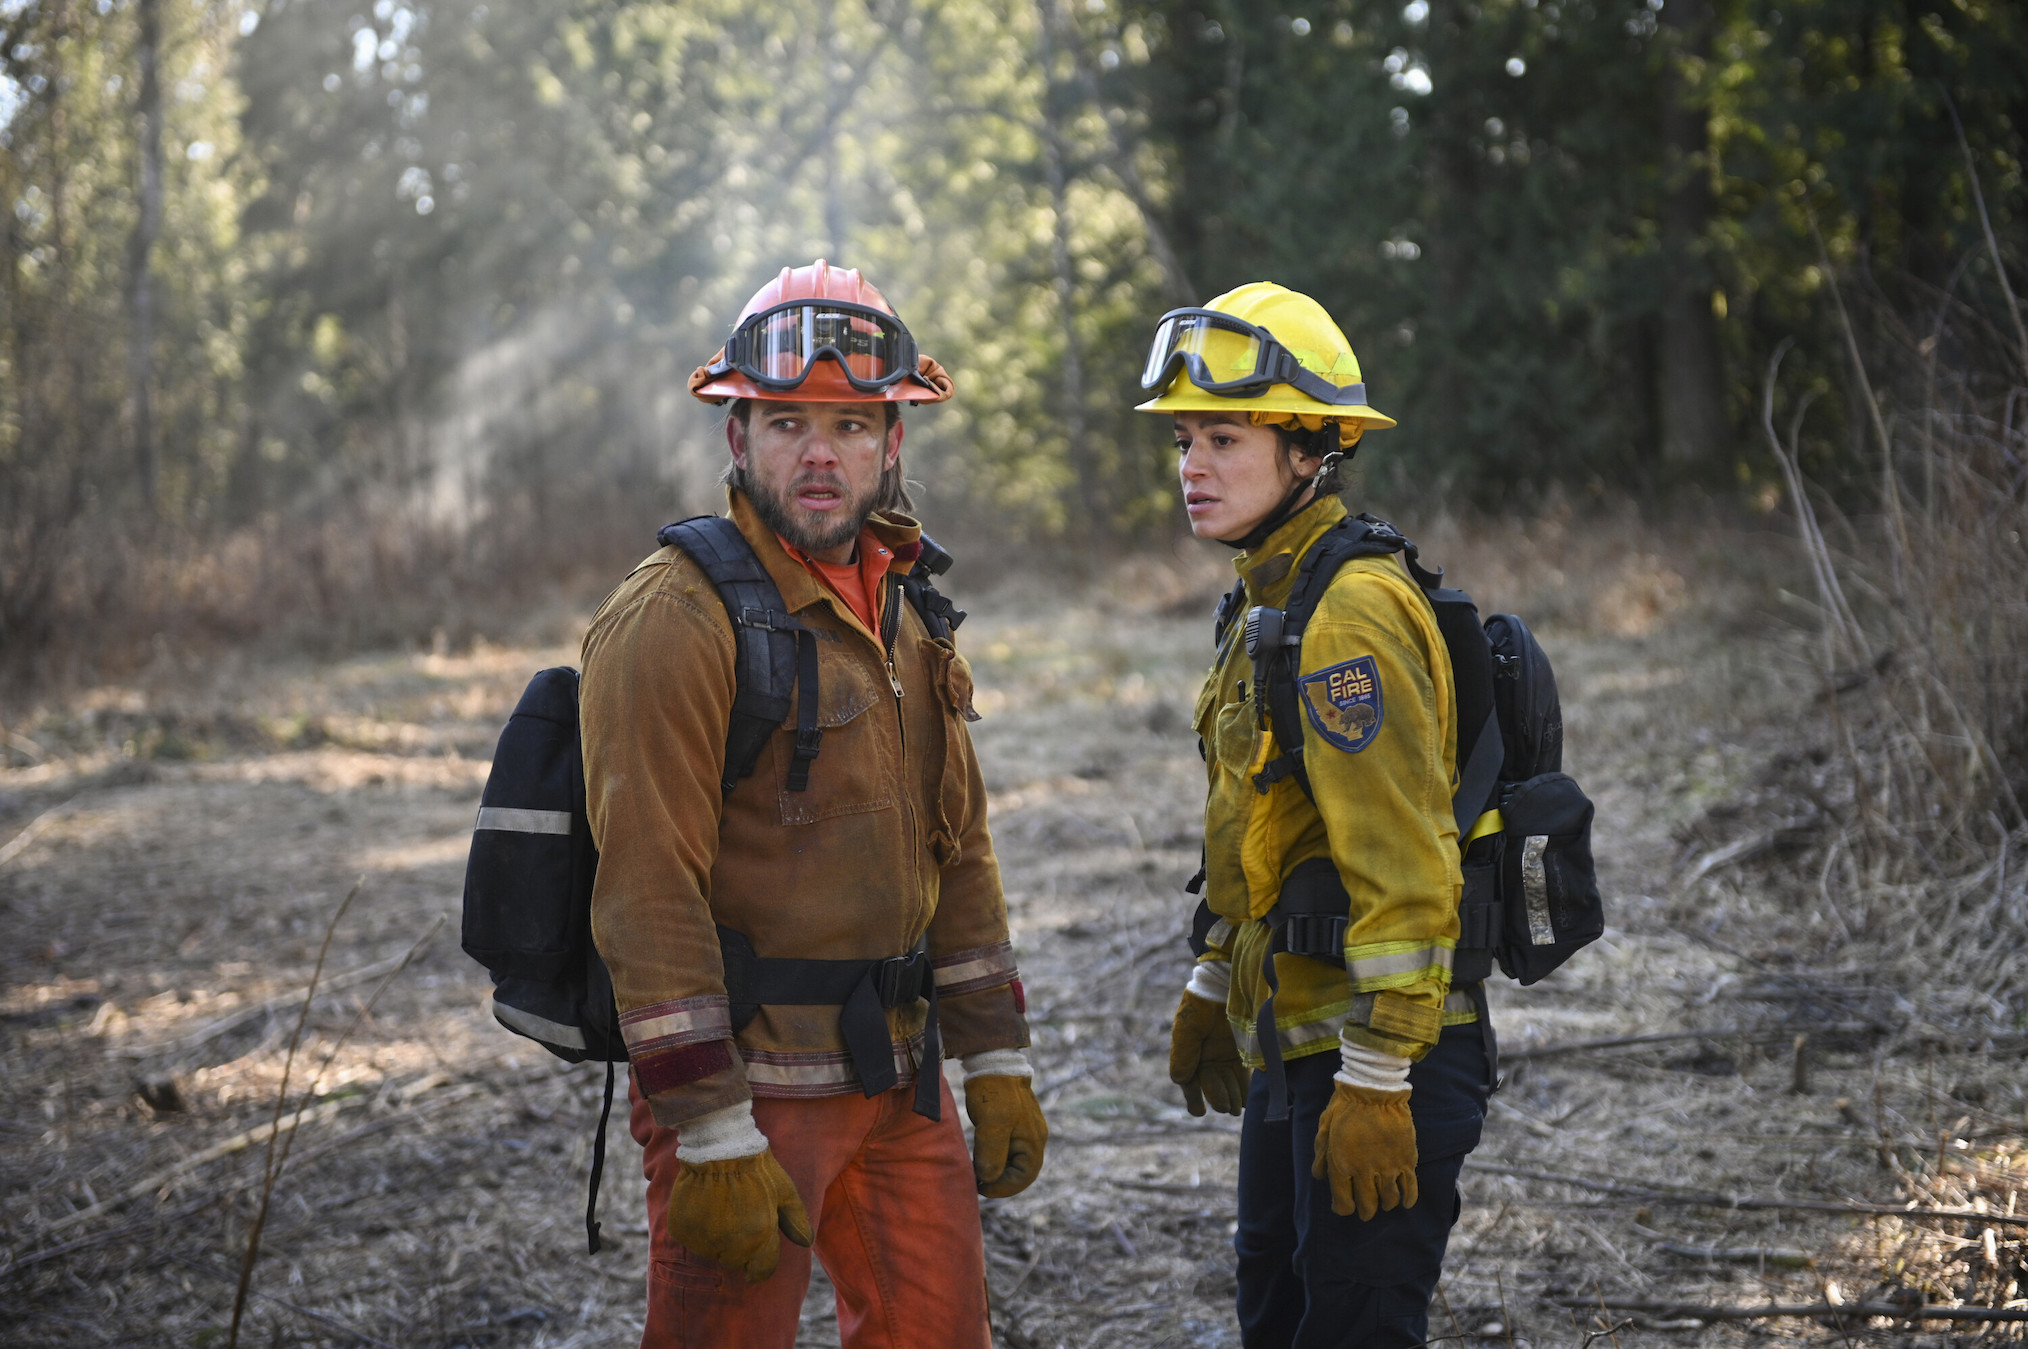 Max Thieriot and Stephanie Arcila in 'Fire Country'